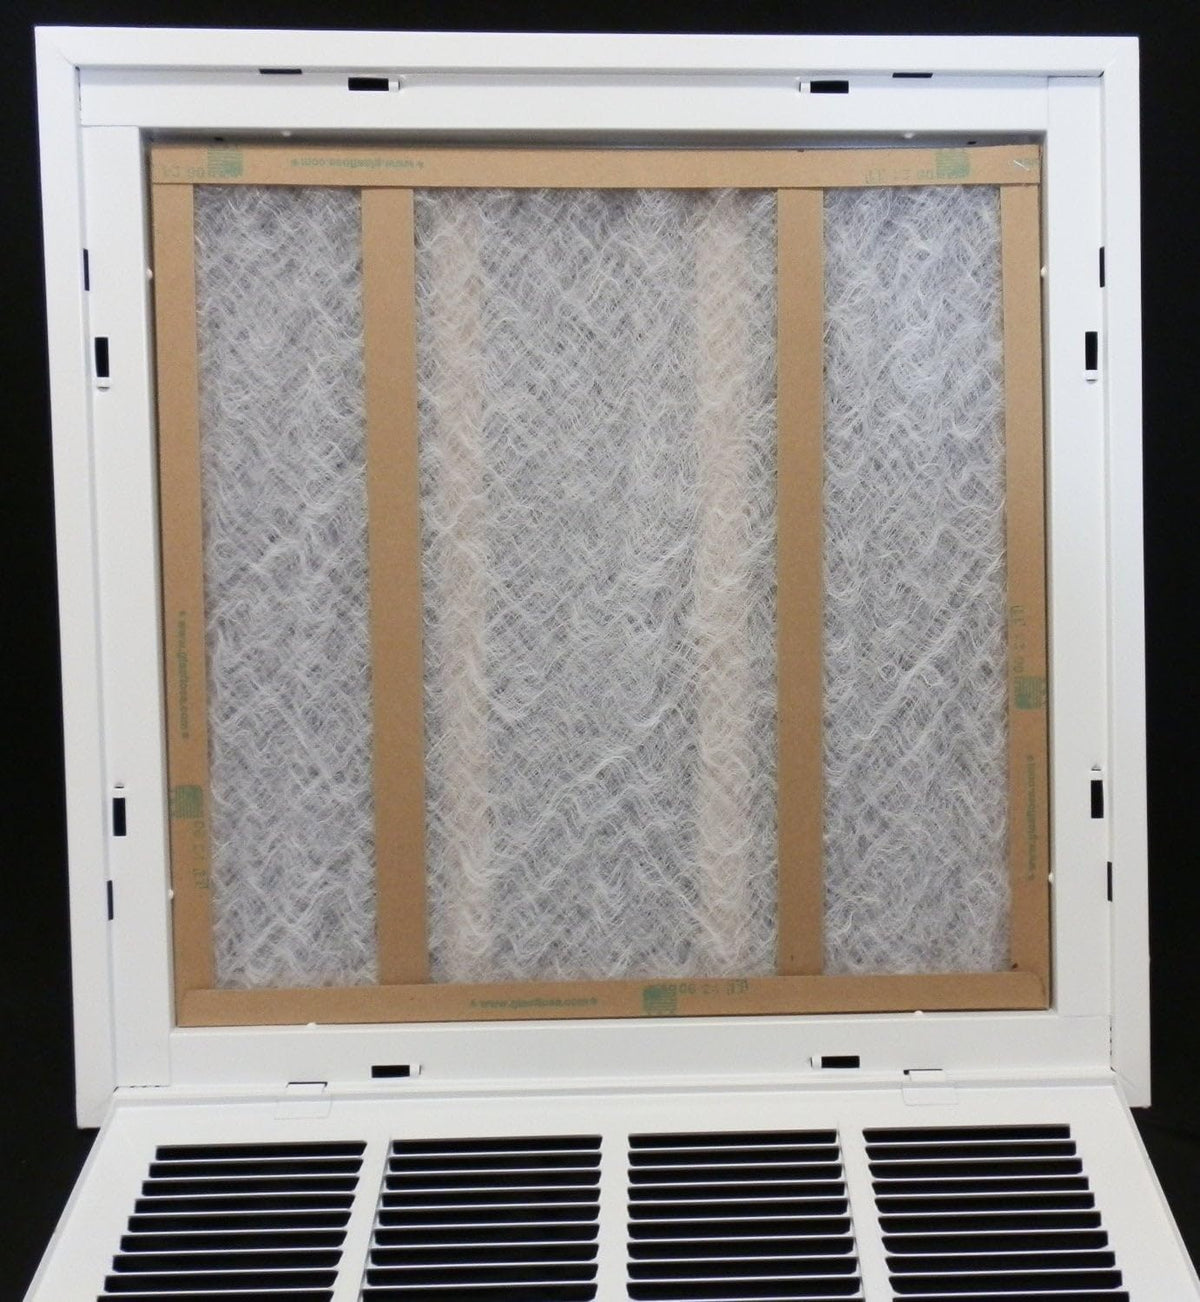 20&quot; X 20&quot; Steel Return Air Filter Grille for 1&quot; Filter - Removable Frame - * Filter Included * [Outer Dimensions: 22 5/8&quot; X 22 5/8&quot;]